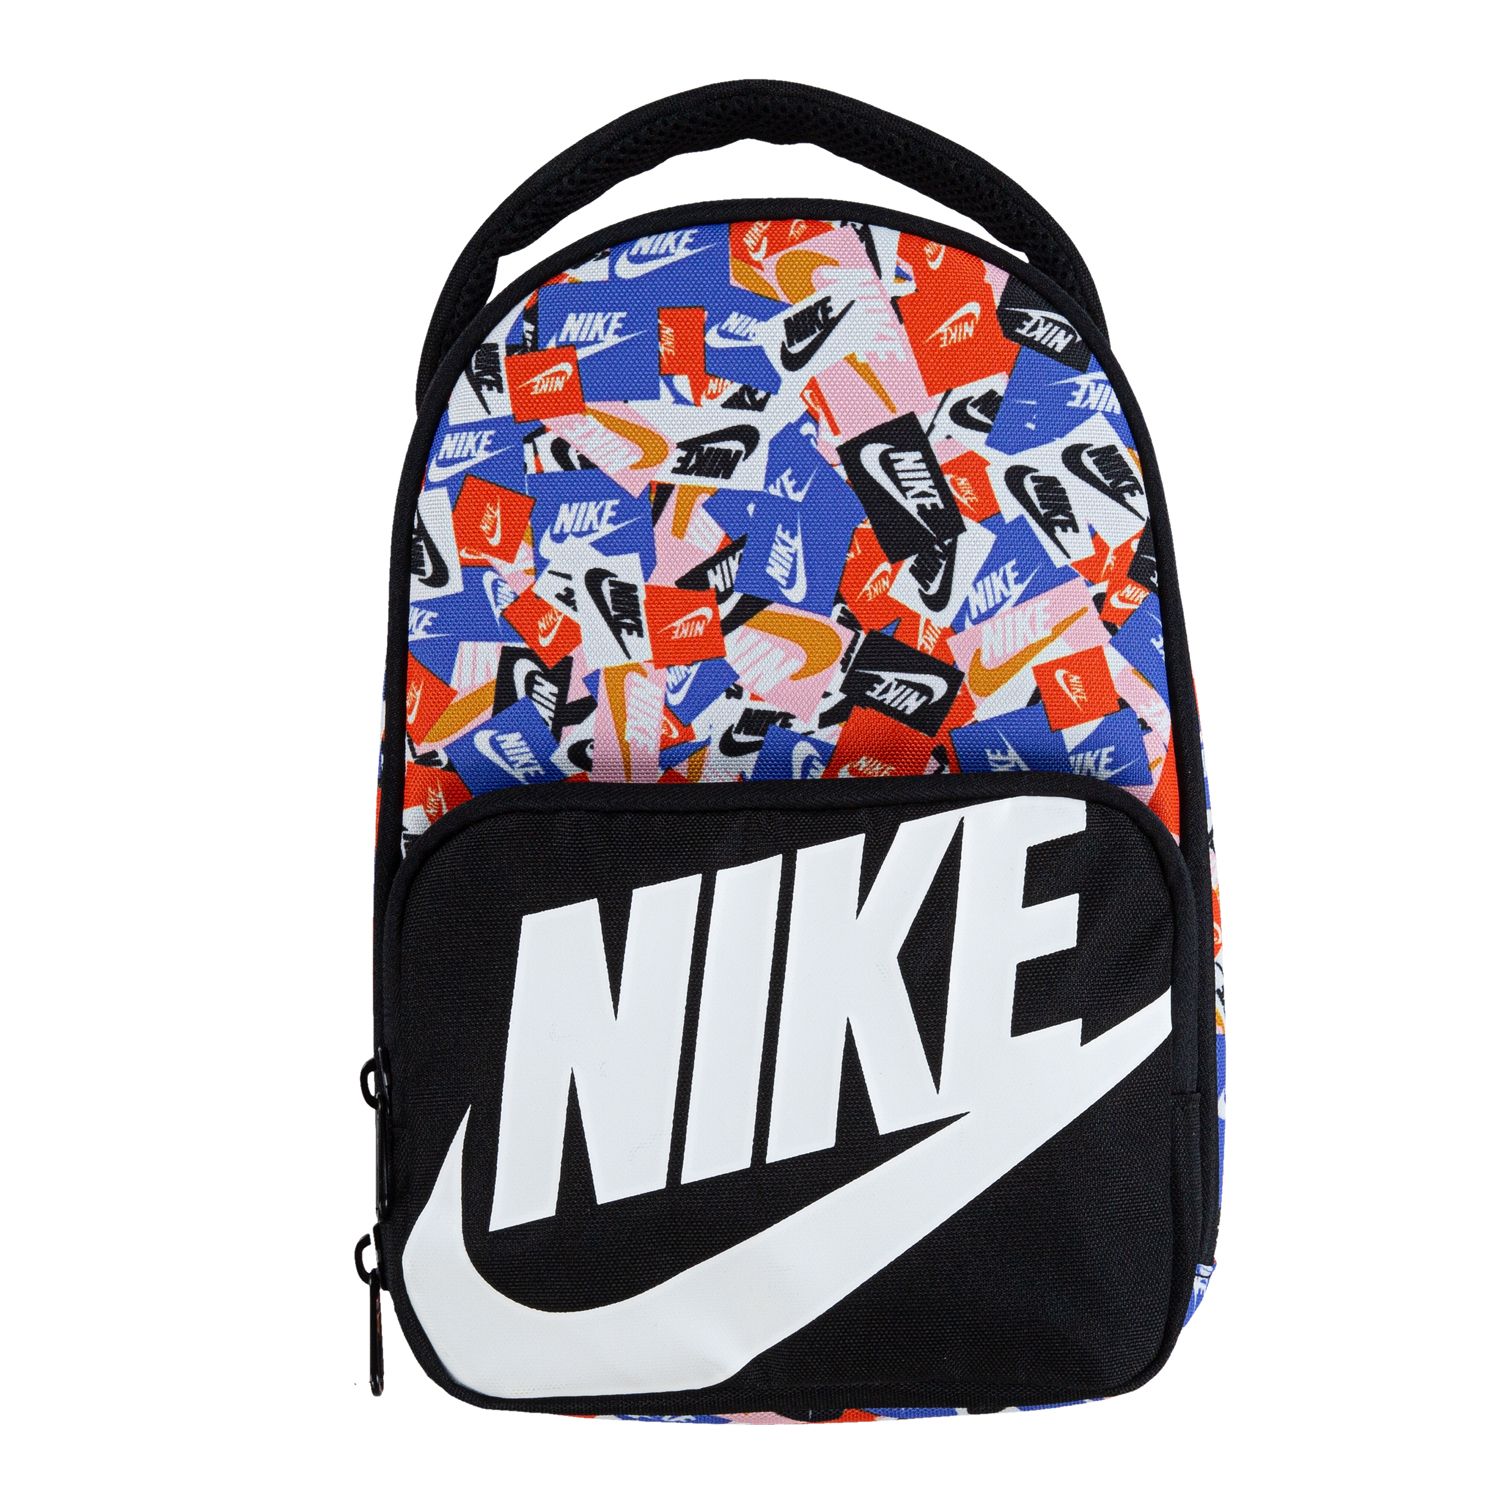 red nike lunch box